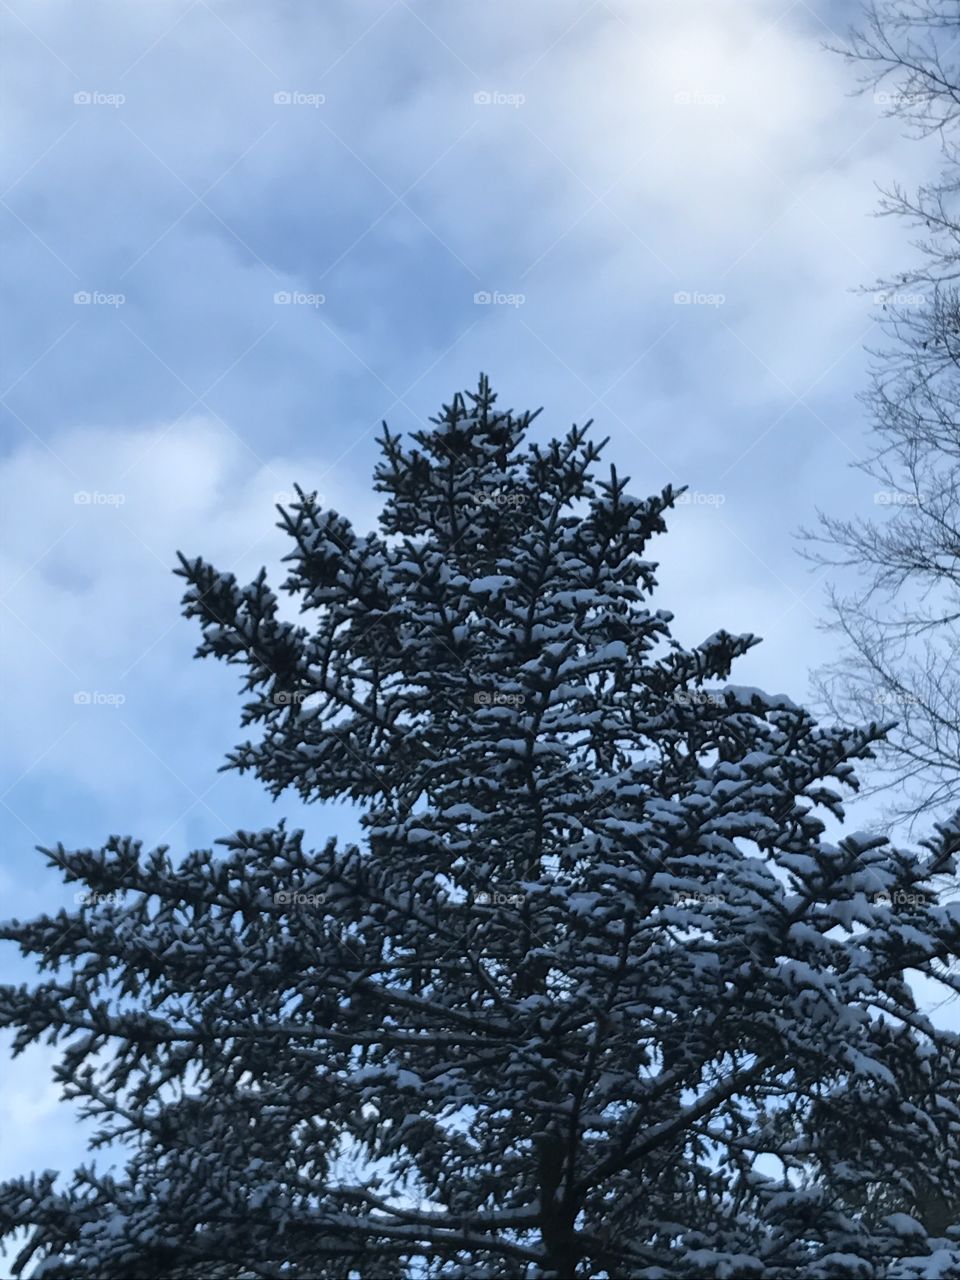 A pine tree after a snowstorm.